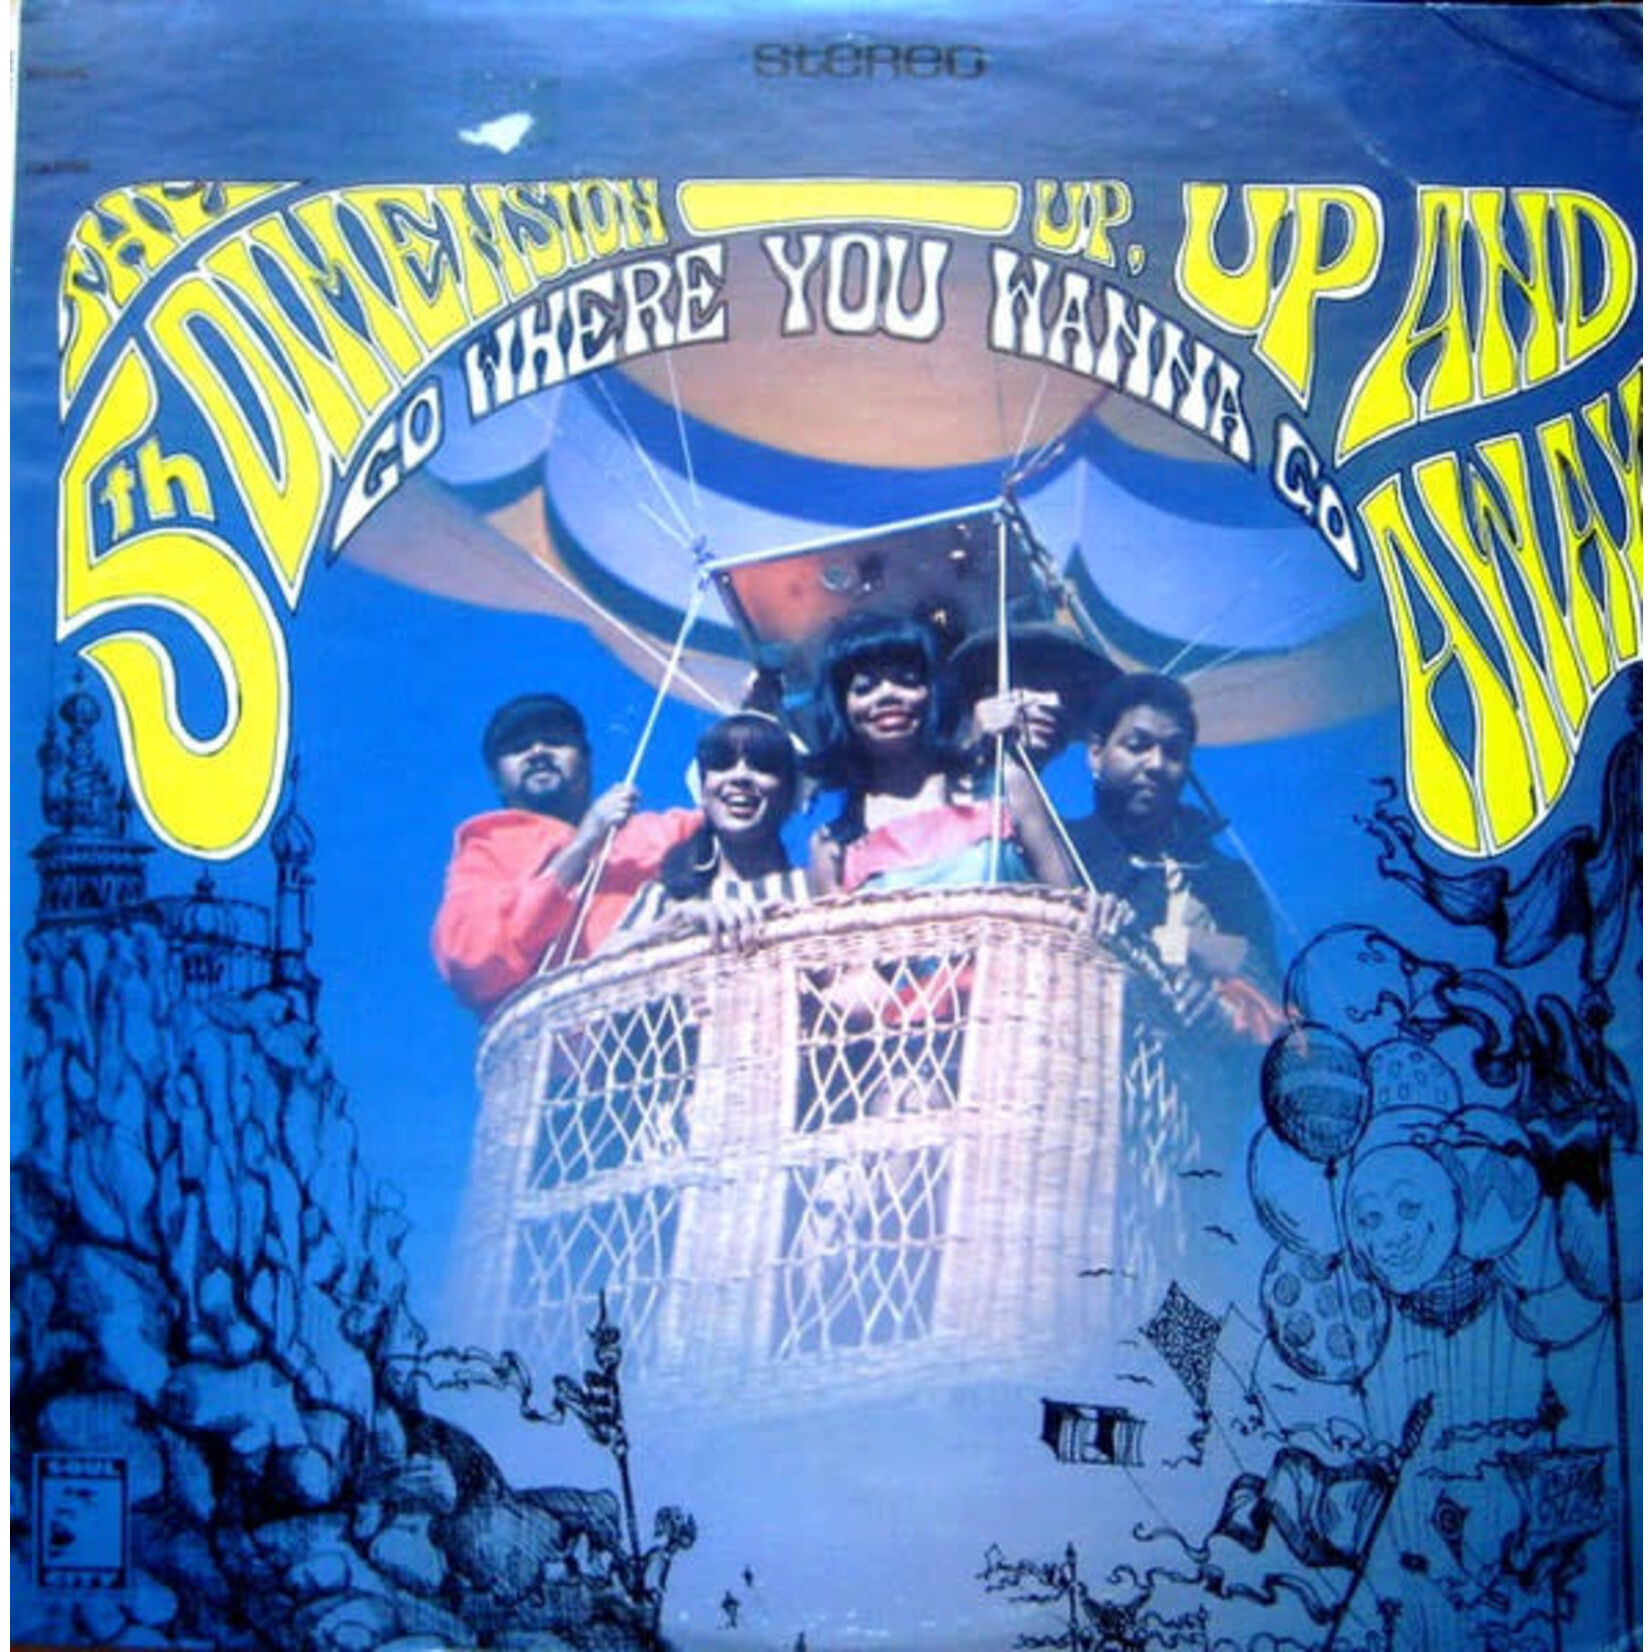 The 5th Dimension* – Up, Up And Away (LP, SCS-92000, VG)